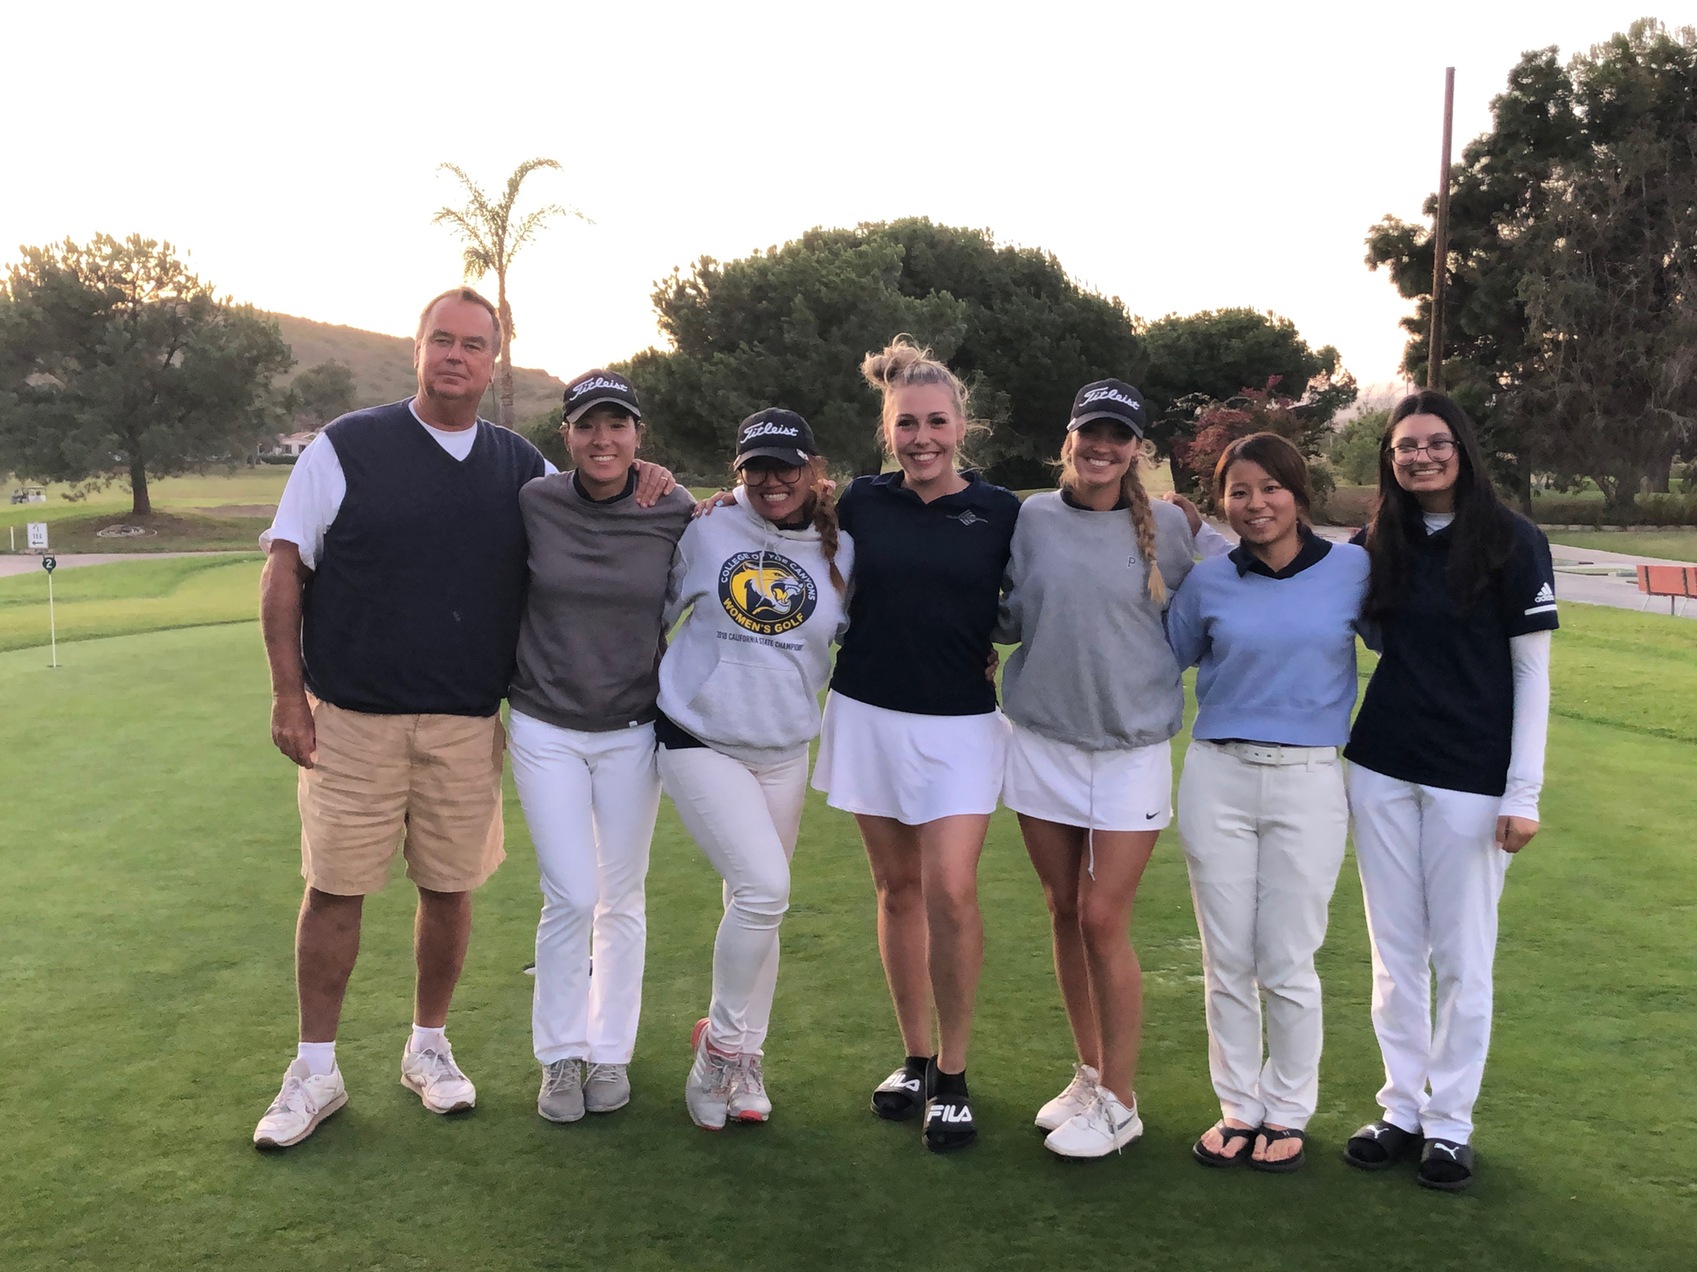 College of the Canyons closed out the 2019 regular season by winning a second straight conference championship, the program's 10th overall, at the Western State Conference Finals event held Oct. 27-28 at Camarillo Springs Golf Course.